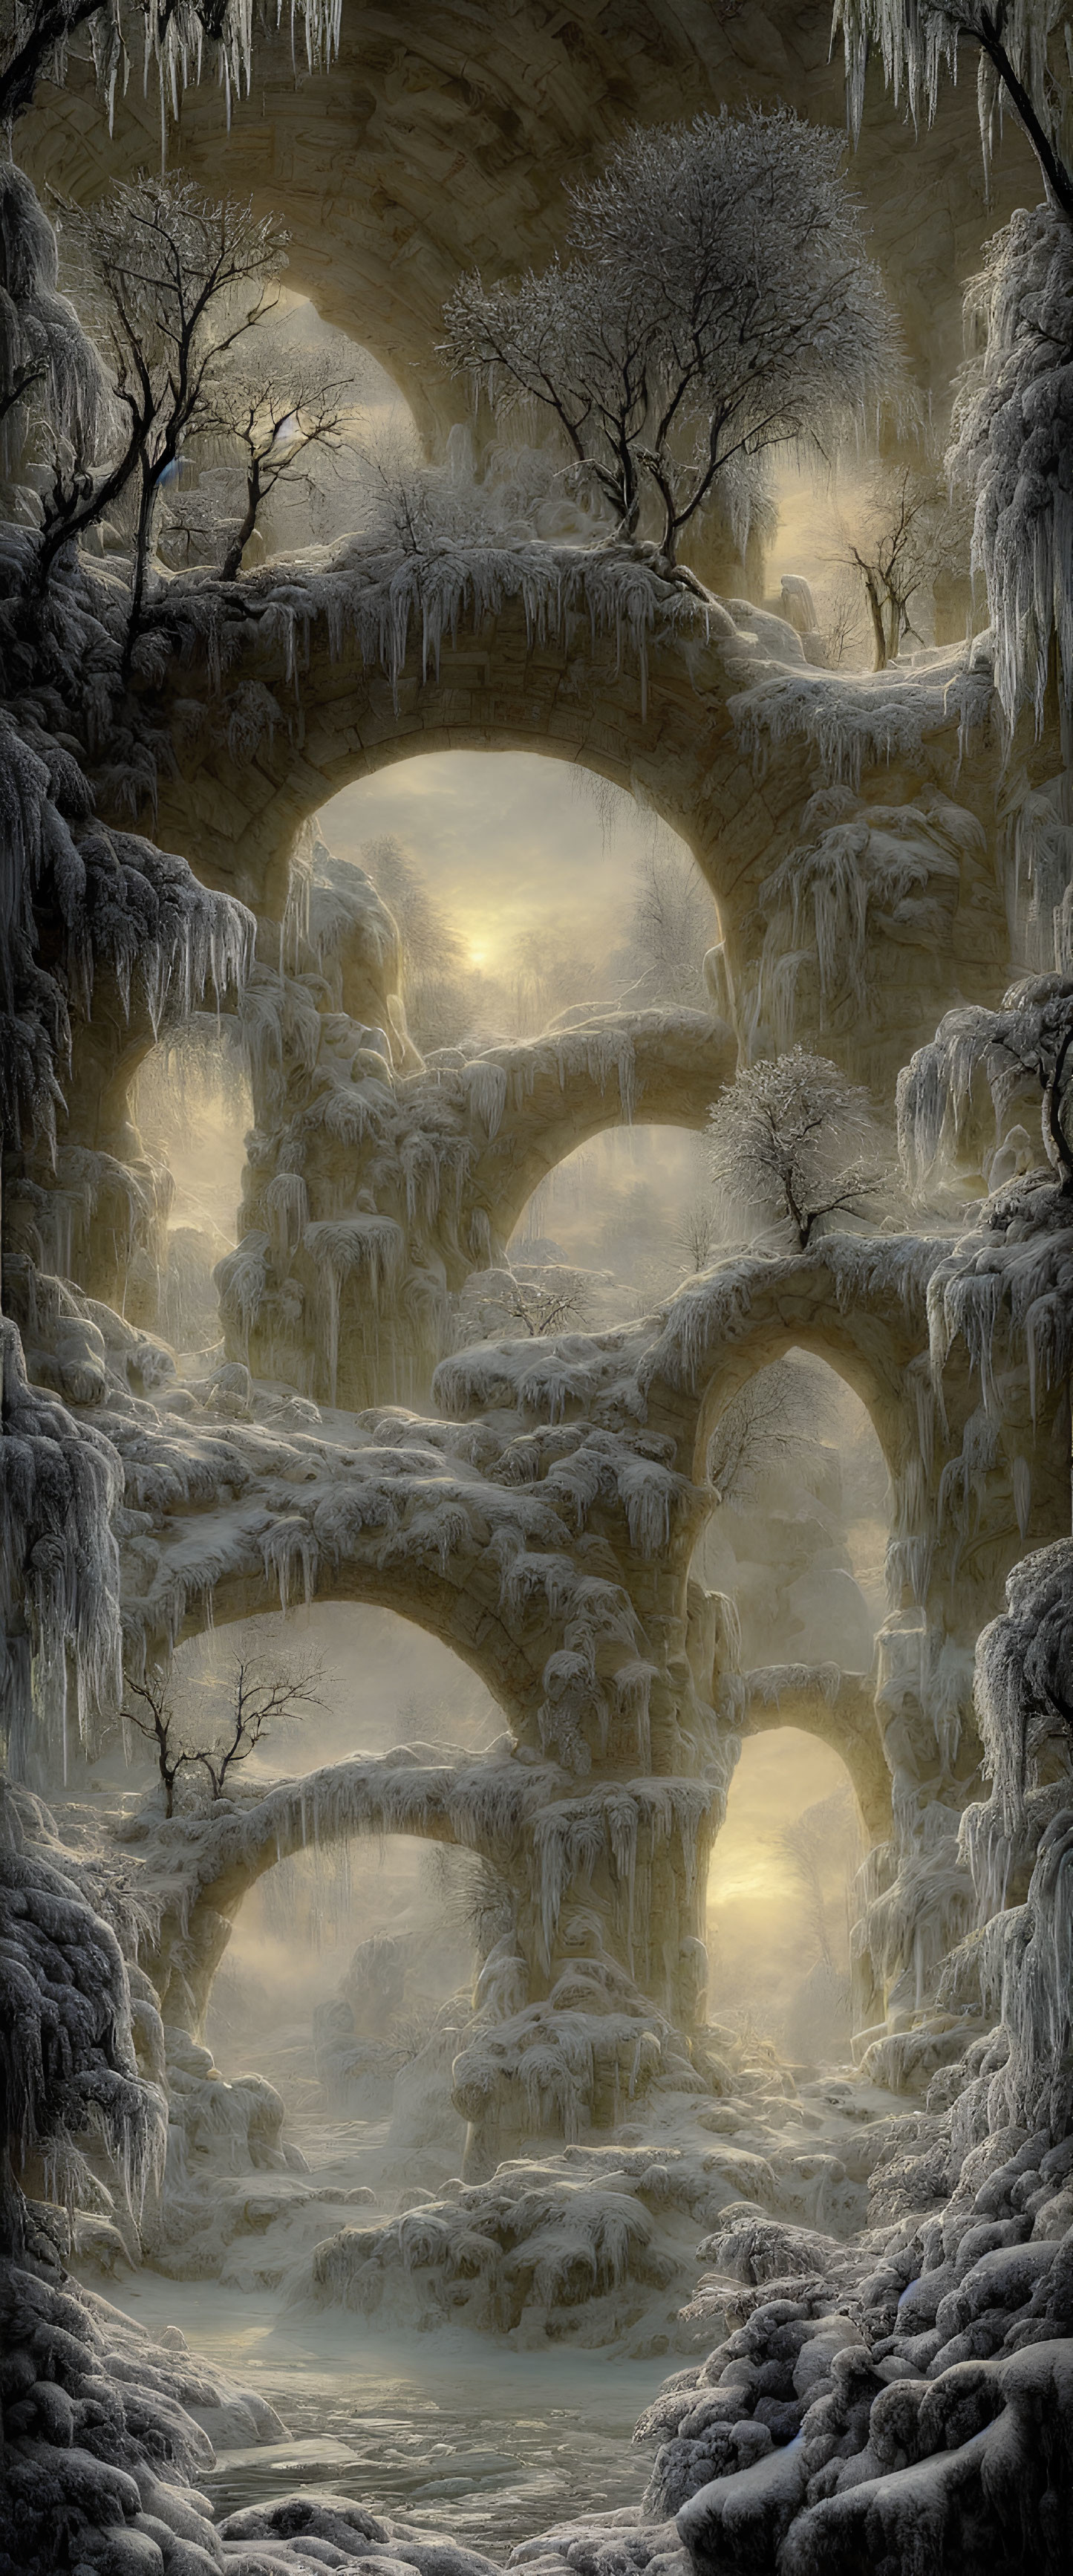 Frozen landscape with stone arches, icicles, and bare trees under warm sun glow